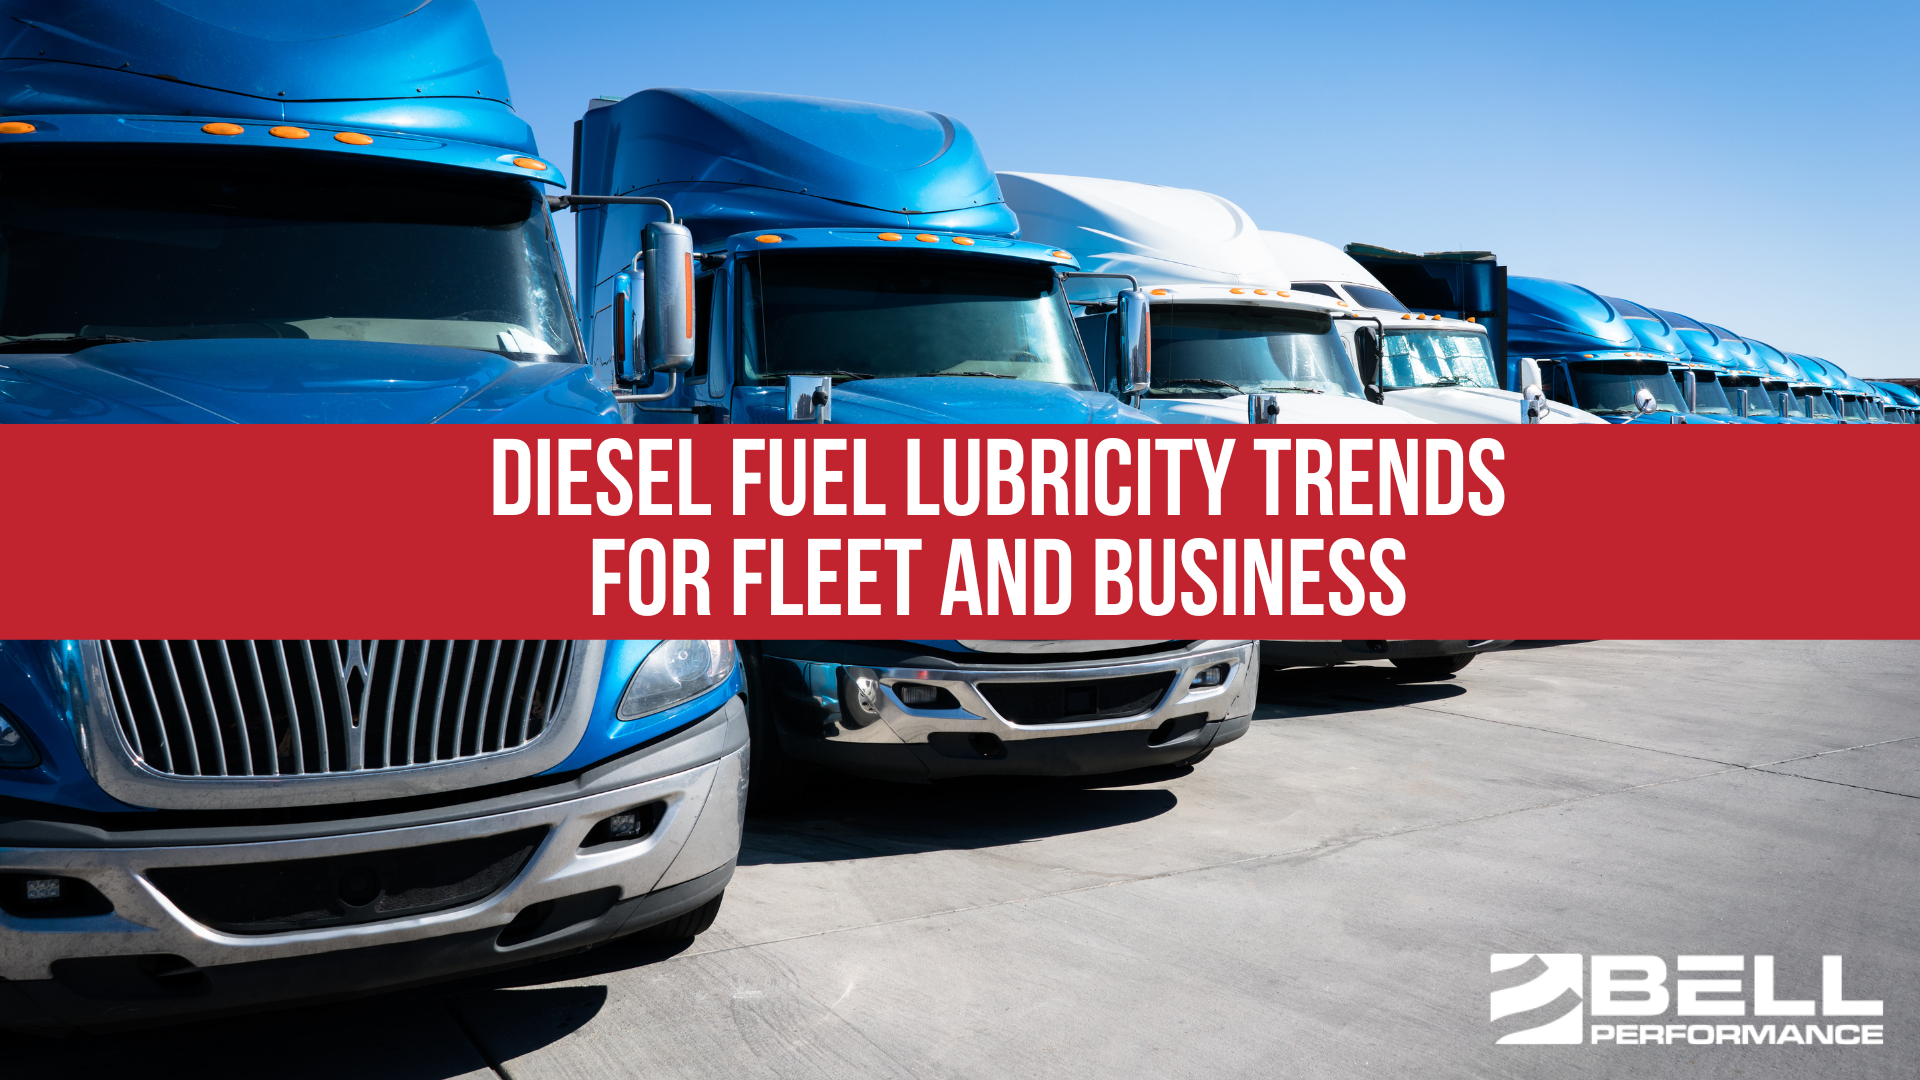 Diesel Fuel Lubricity Trends for Fleet and Business